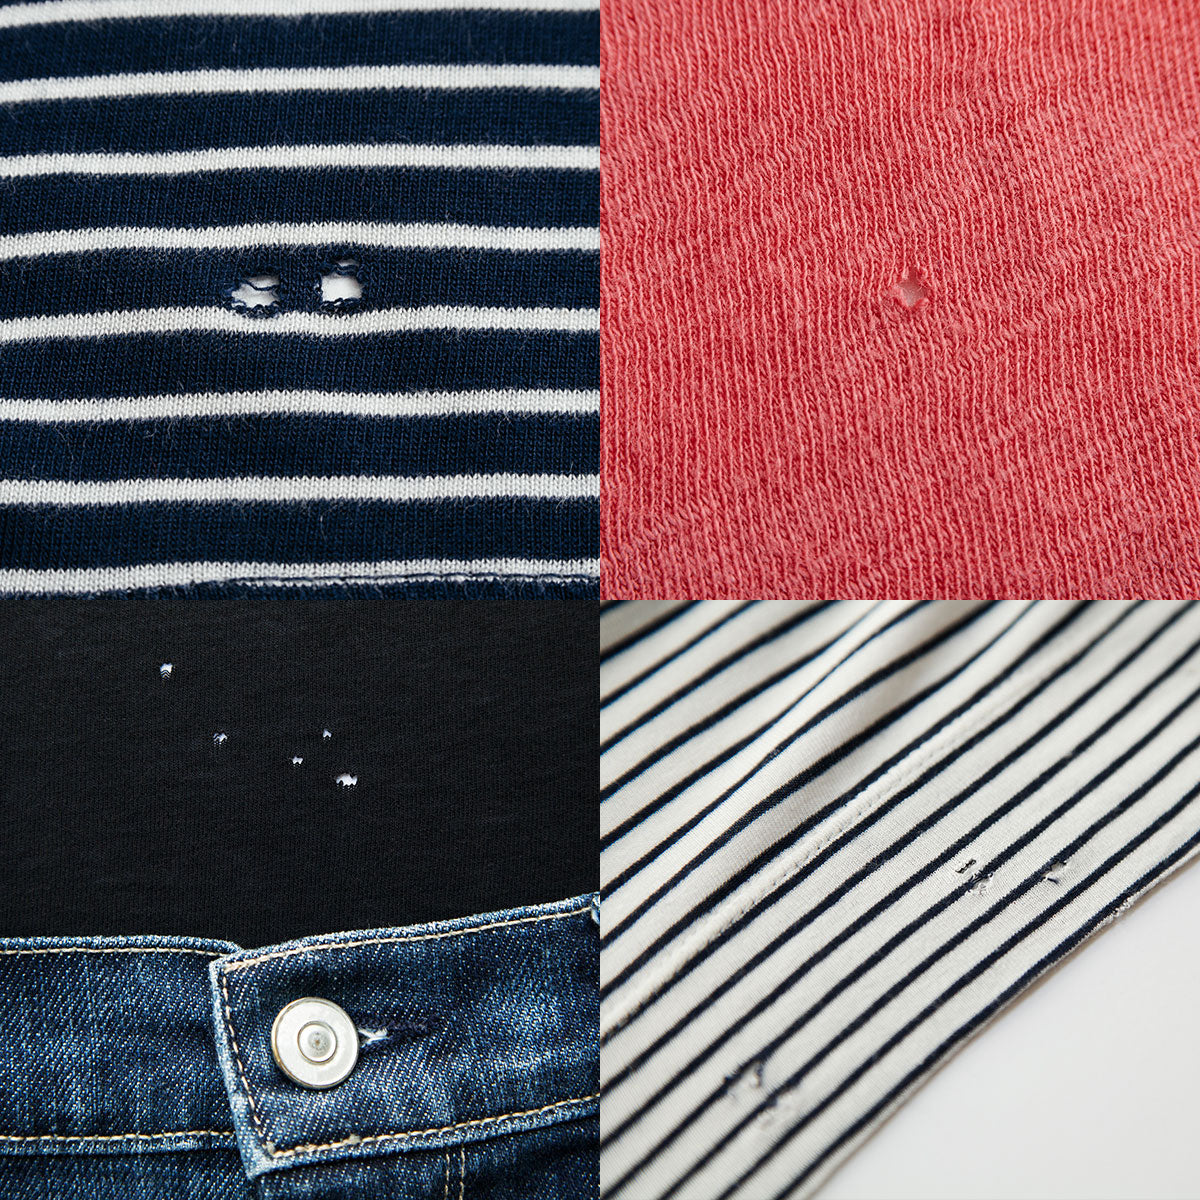 Mysterious holes at the bottom of your top or shirt